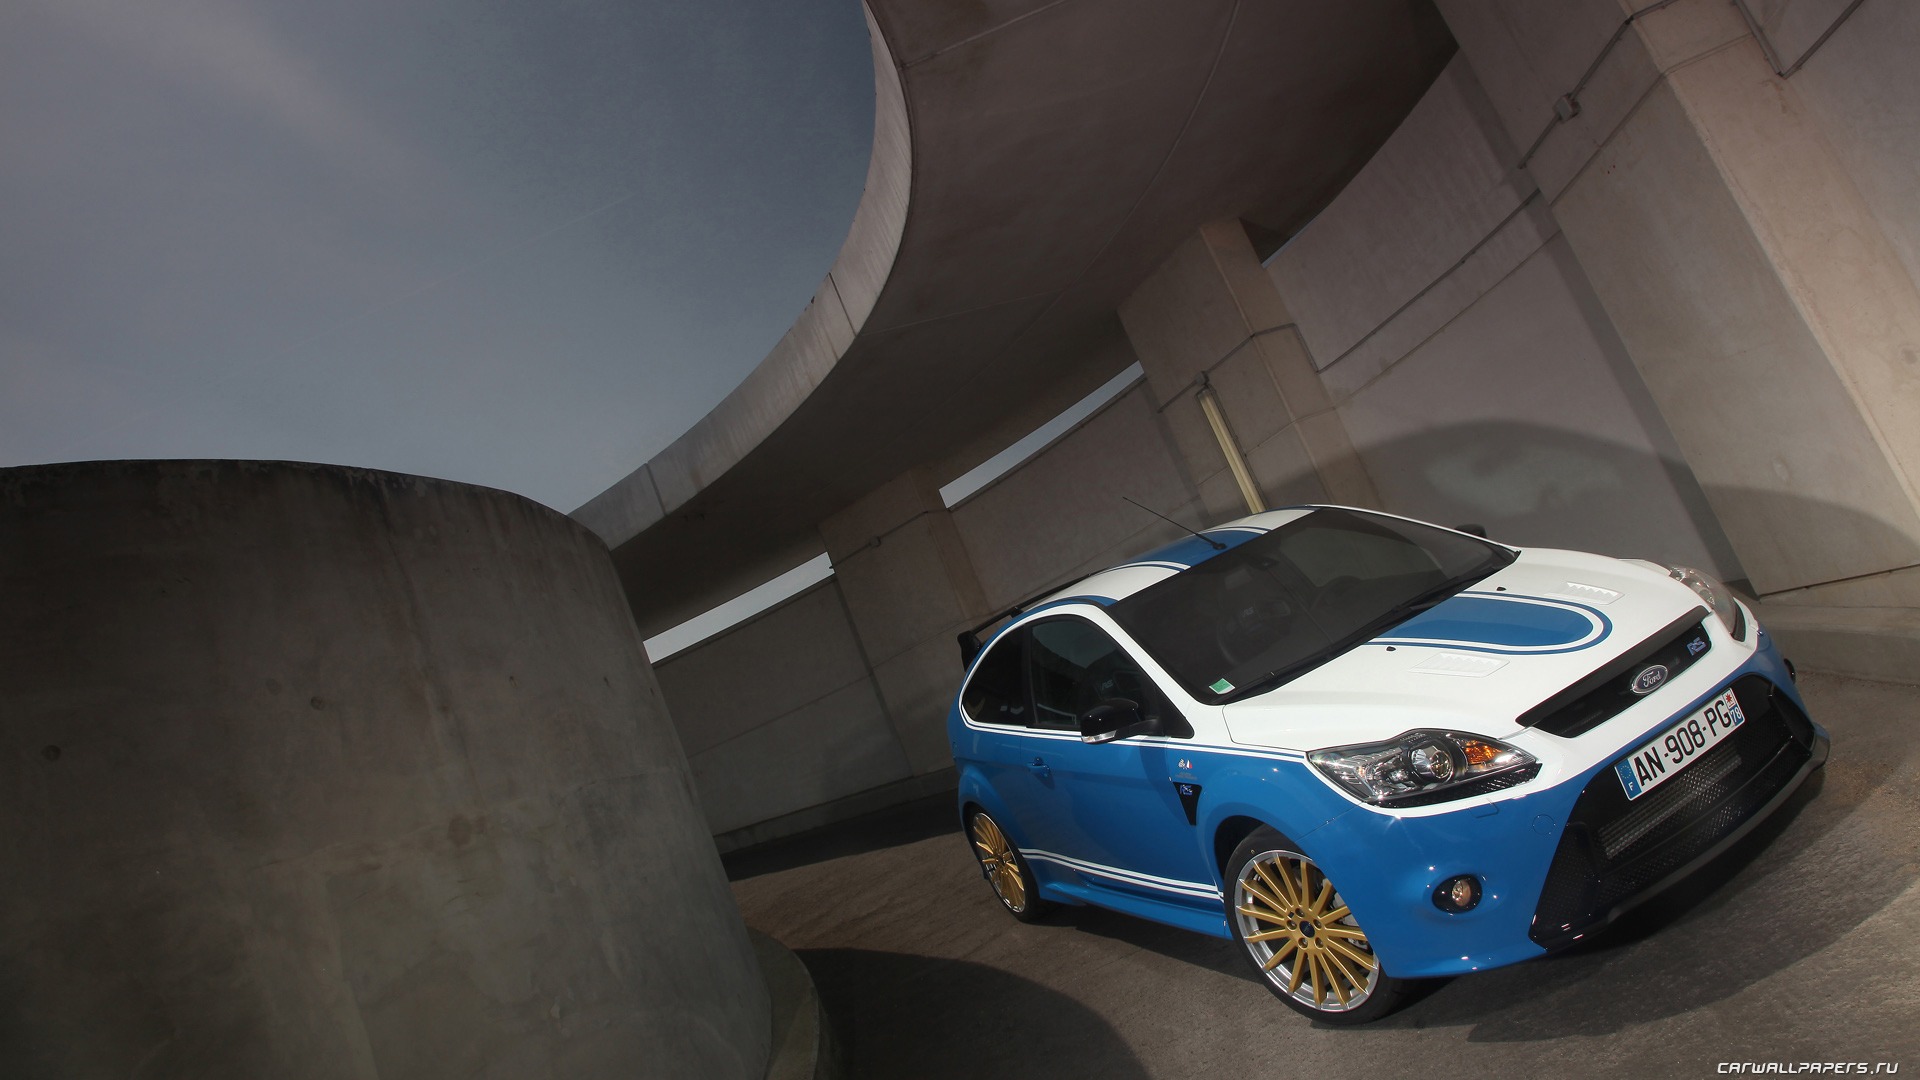 Ford Focus RS Le Mans Classic - 2010 福特4 - 1920x1080